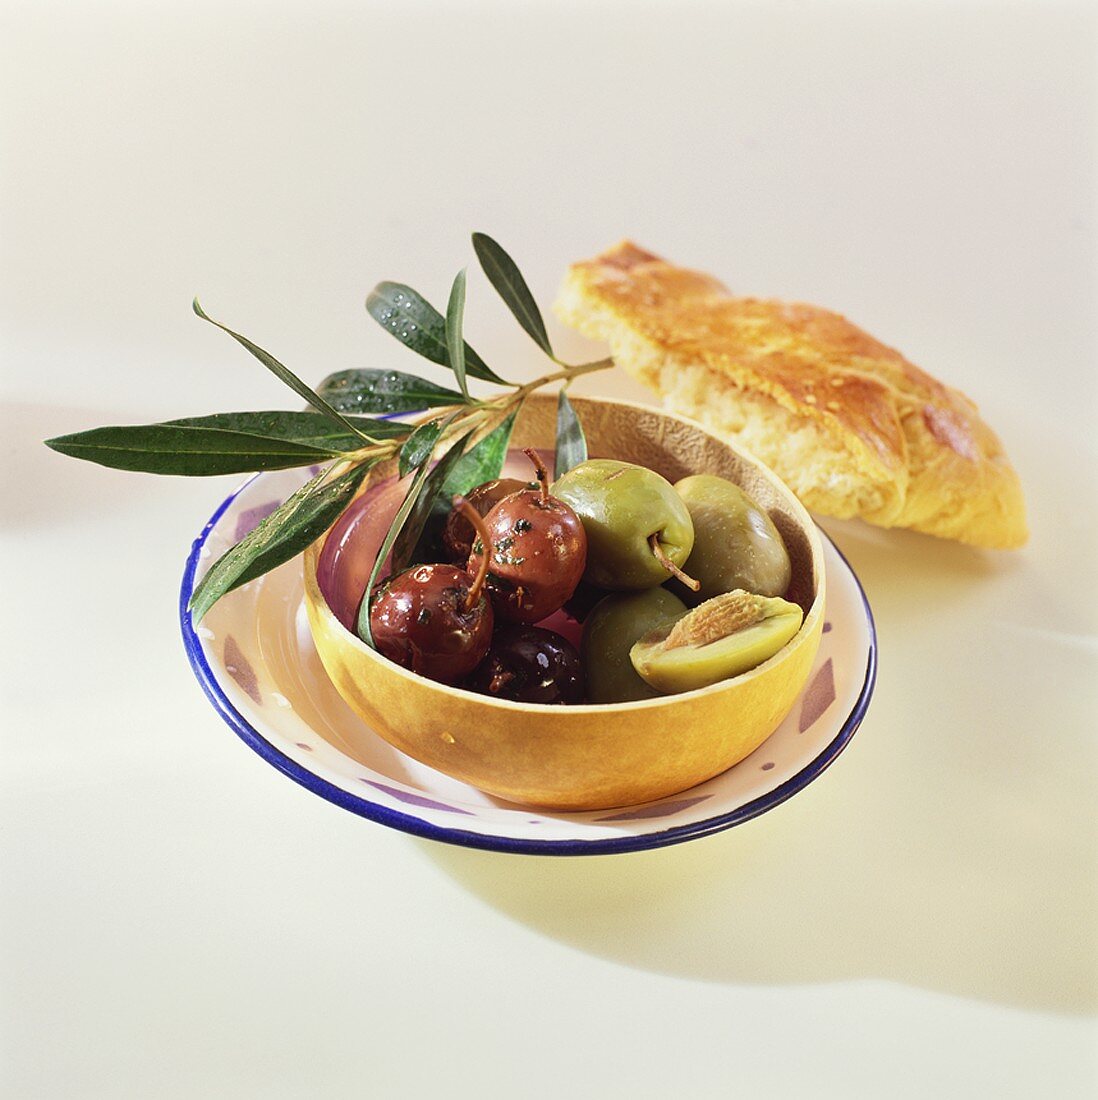 Marinated black and green olives and olive branch